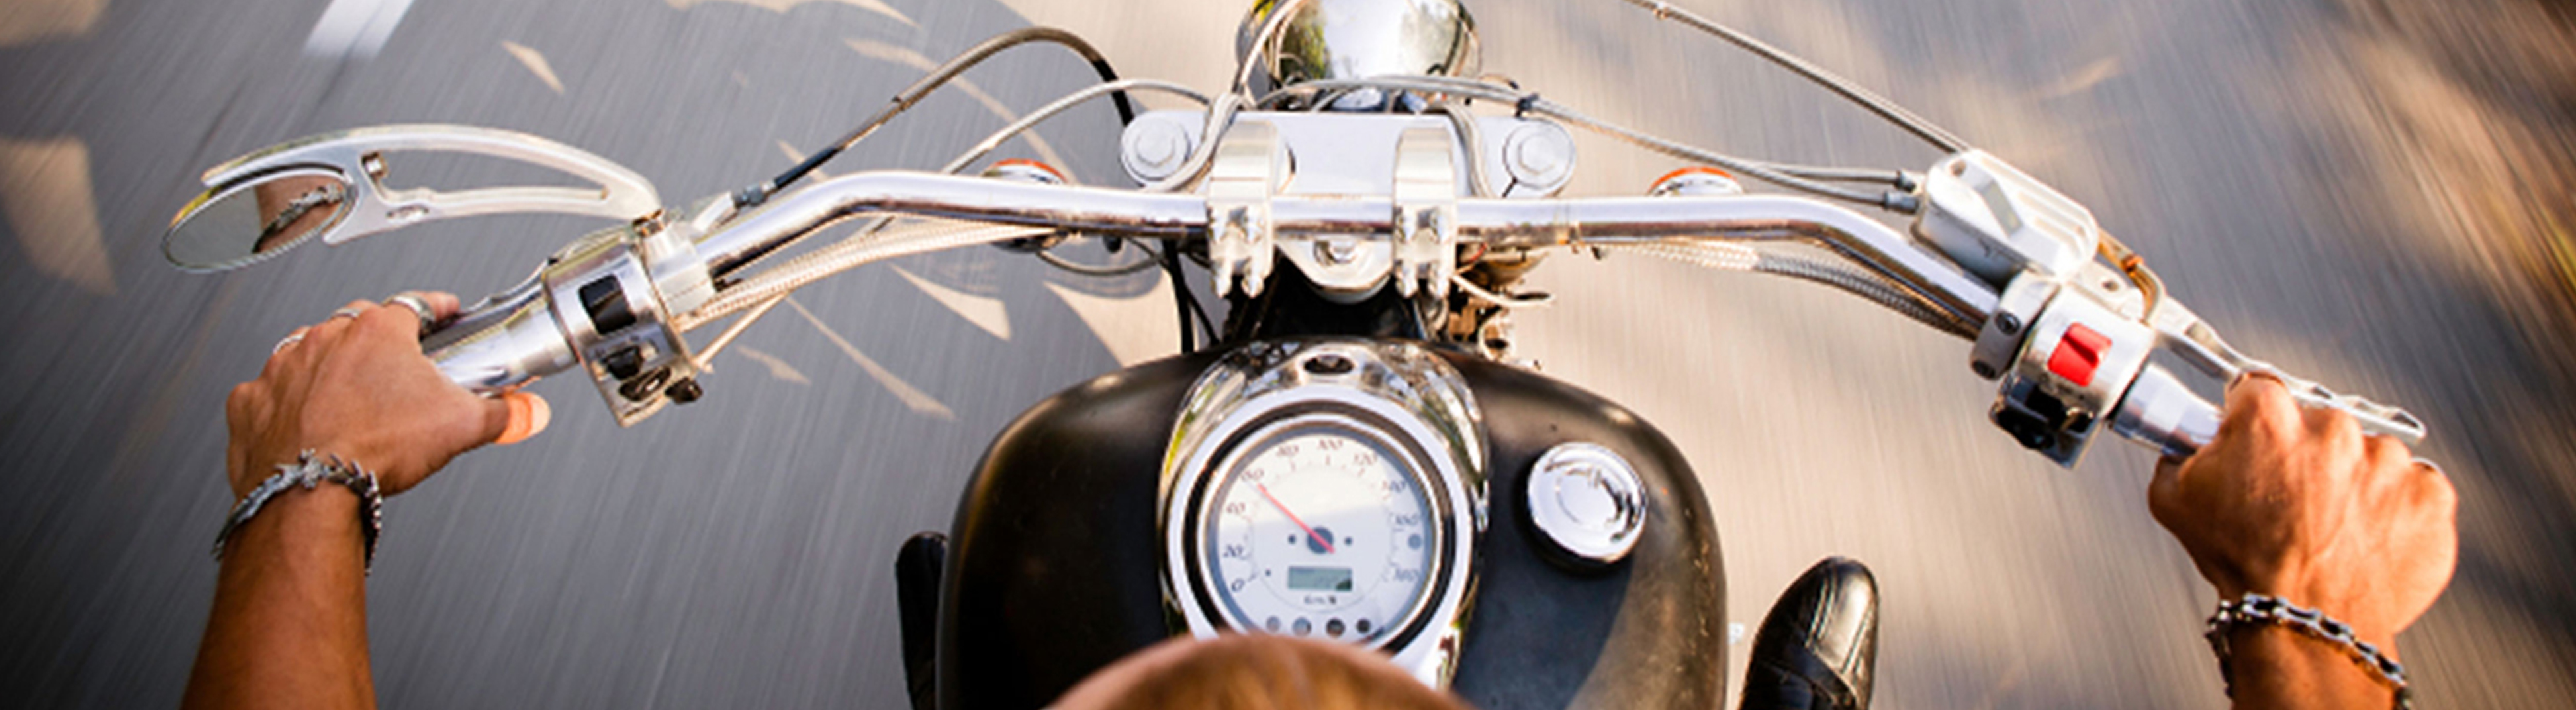 New Hampshire Motorcycle insurance coverage